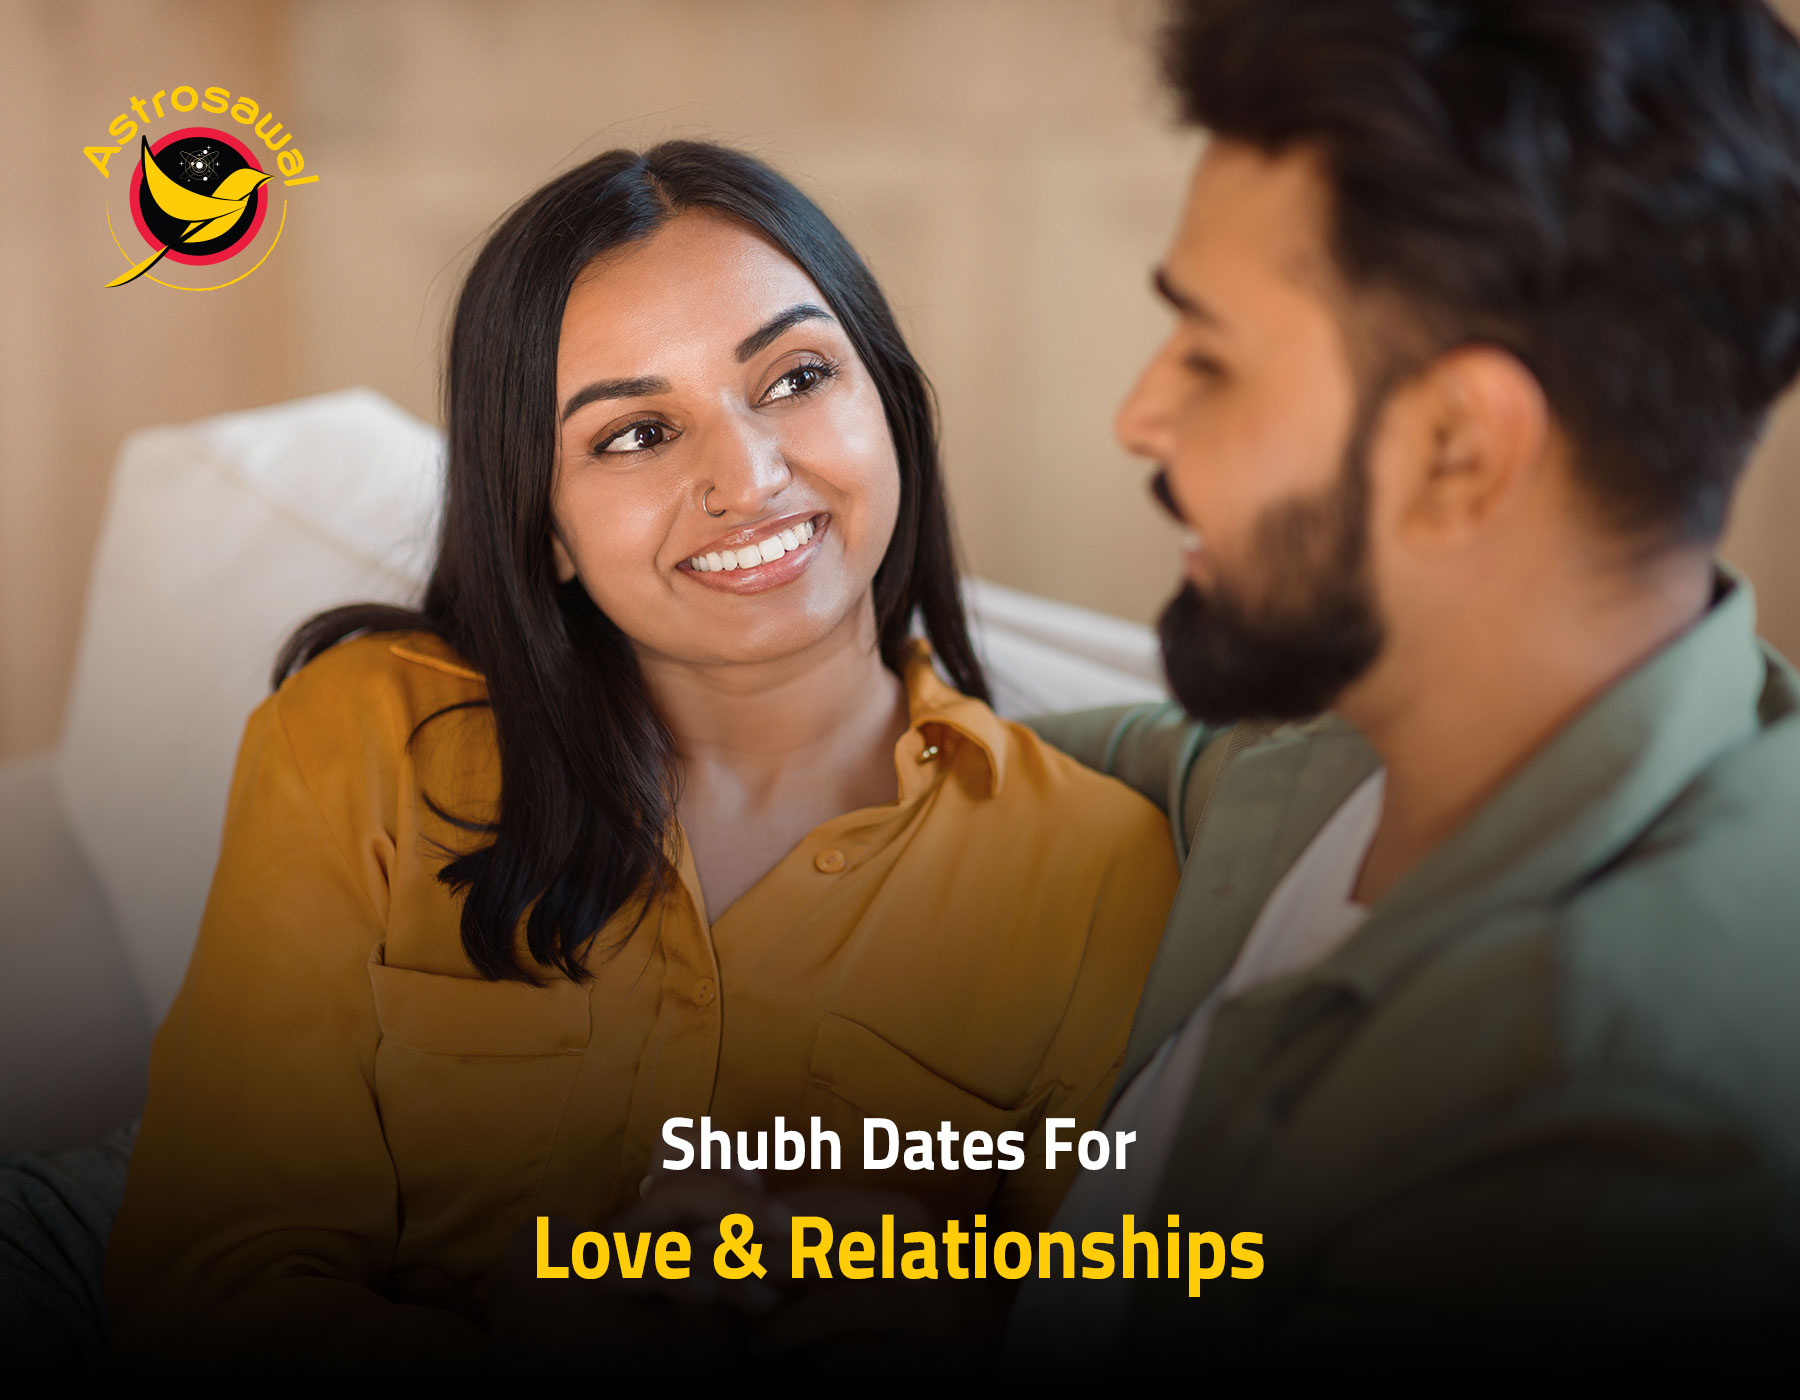 Shubh Dates For Love & Relationships